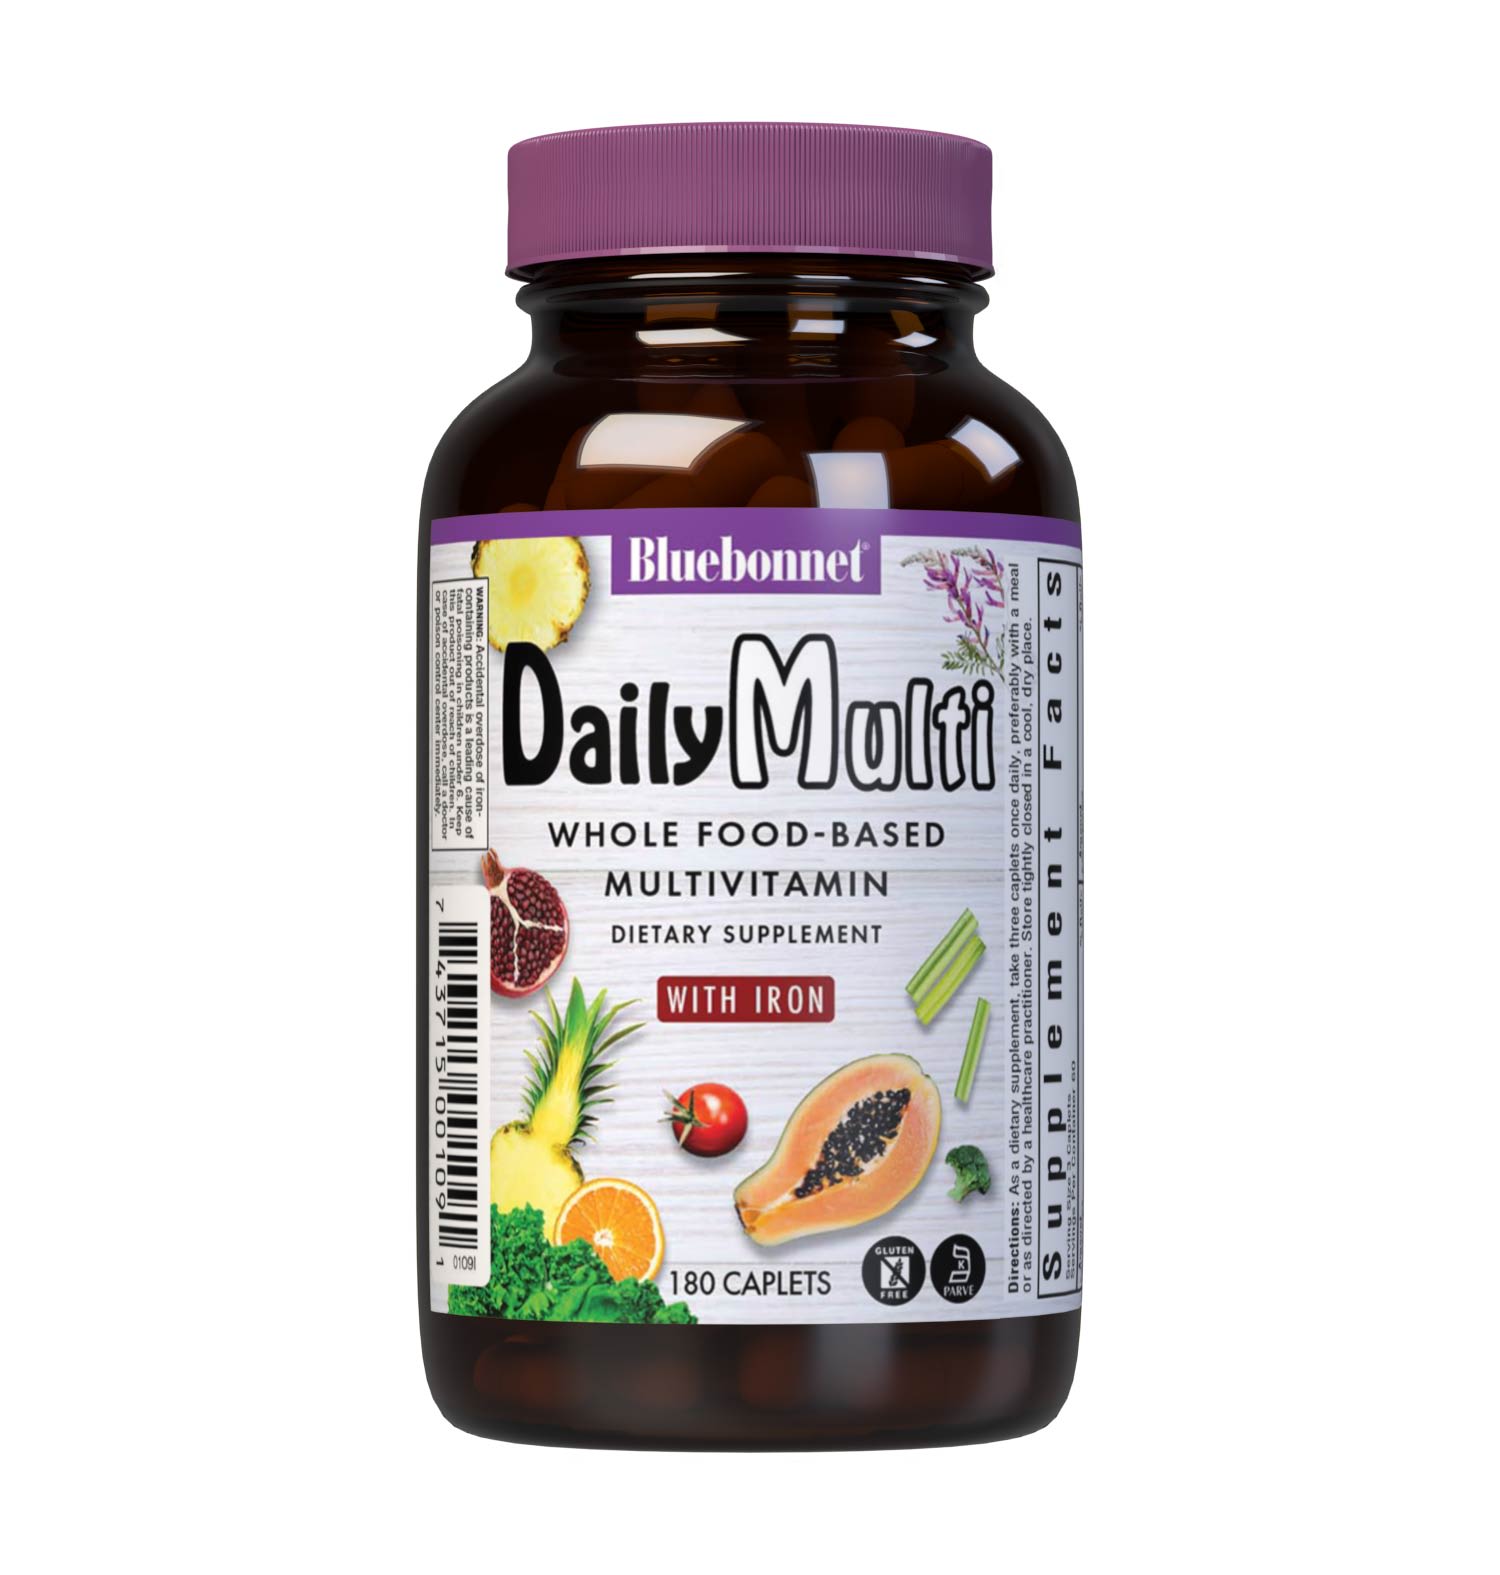 Bluebonnet’s DailyMulti Formula 180 caplets is a whole-food based multivitamin & multimineral dietary supplement that is gluten-free, enriched with super whole food concentrates, as well as providing a perfect blend of plant source nutrients, plant oils, herbs, vitamins, minerals, antioxidants, enzymes and a phytonutrient sprout blend. #size_180 count